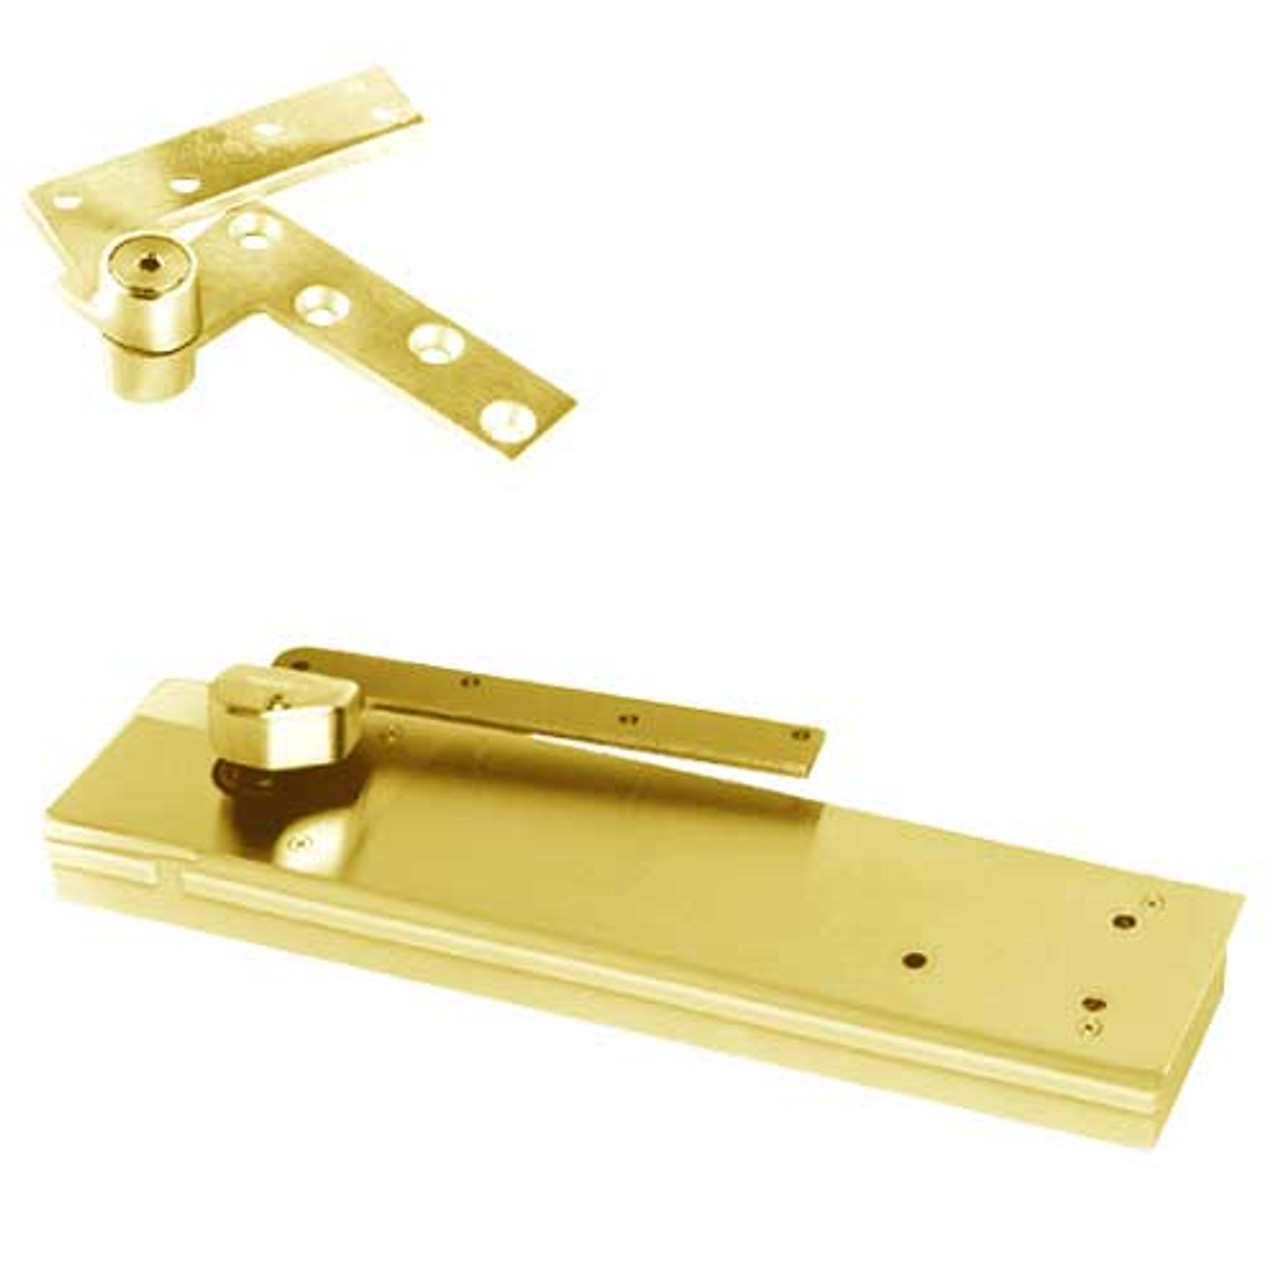 5104ABC105-1-1/2OS-RH-605 Rixson 51 Series 1-1/2" Offset Hung Shallow Depth Floor Closers in Bright Brass Finish